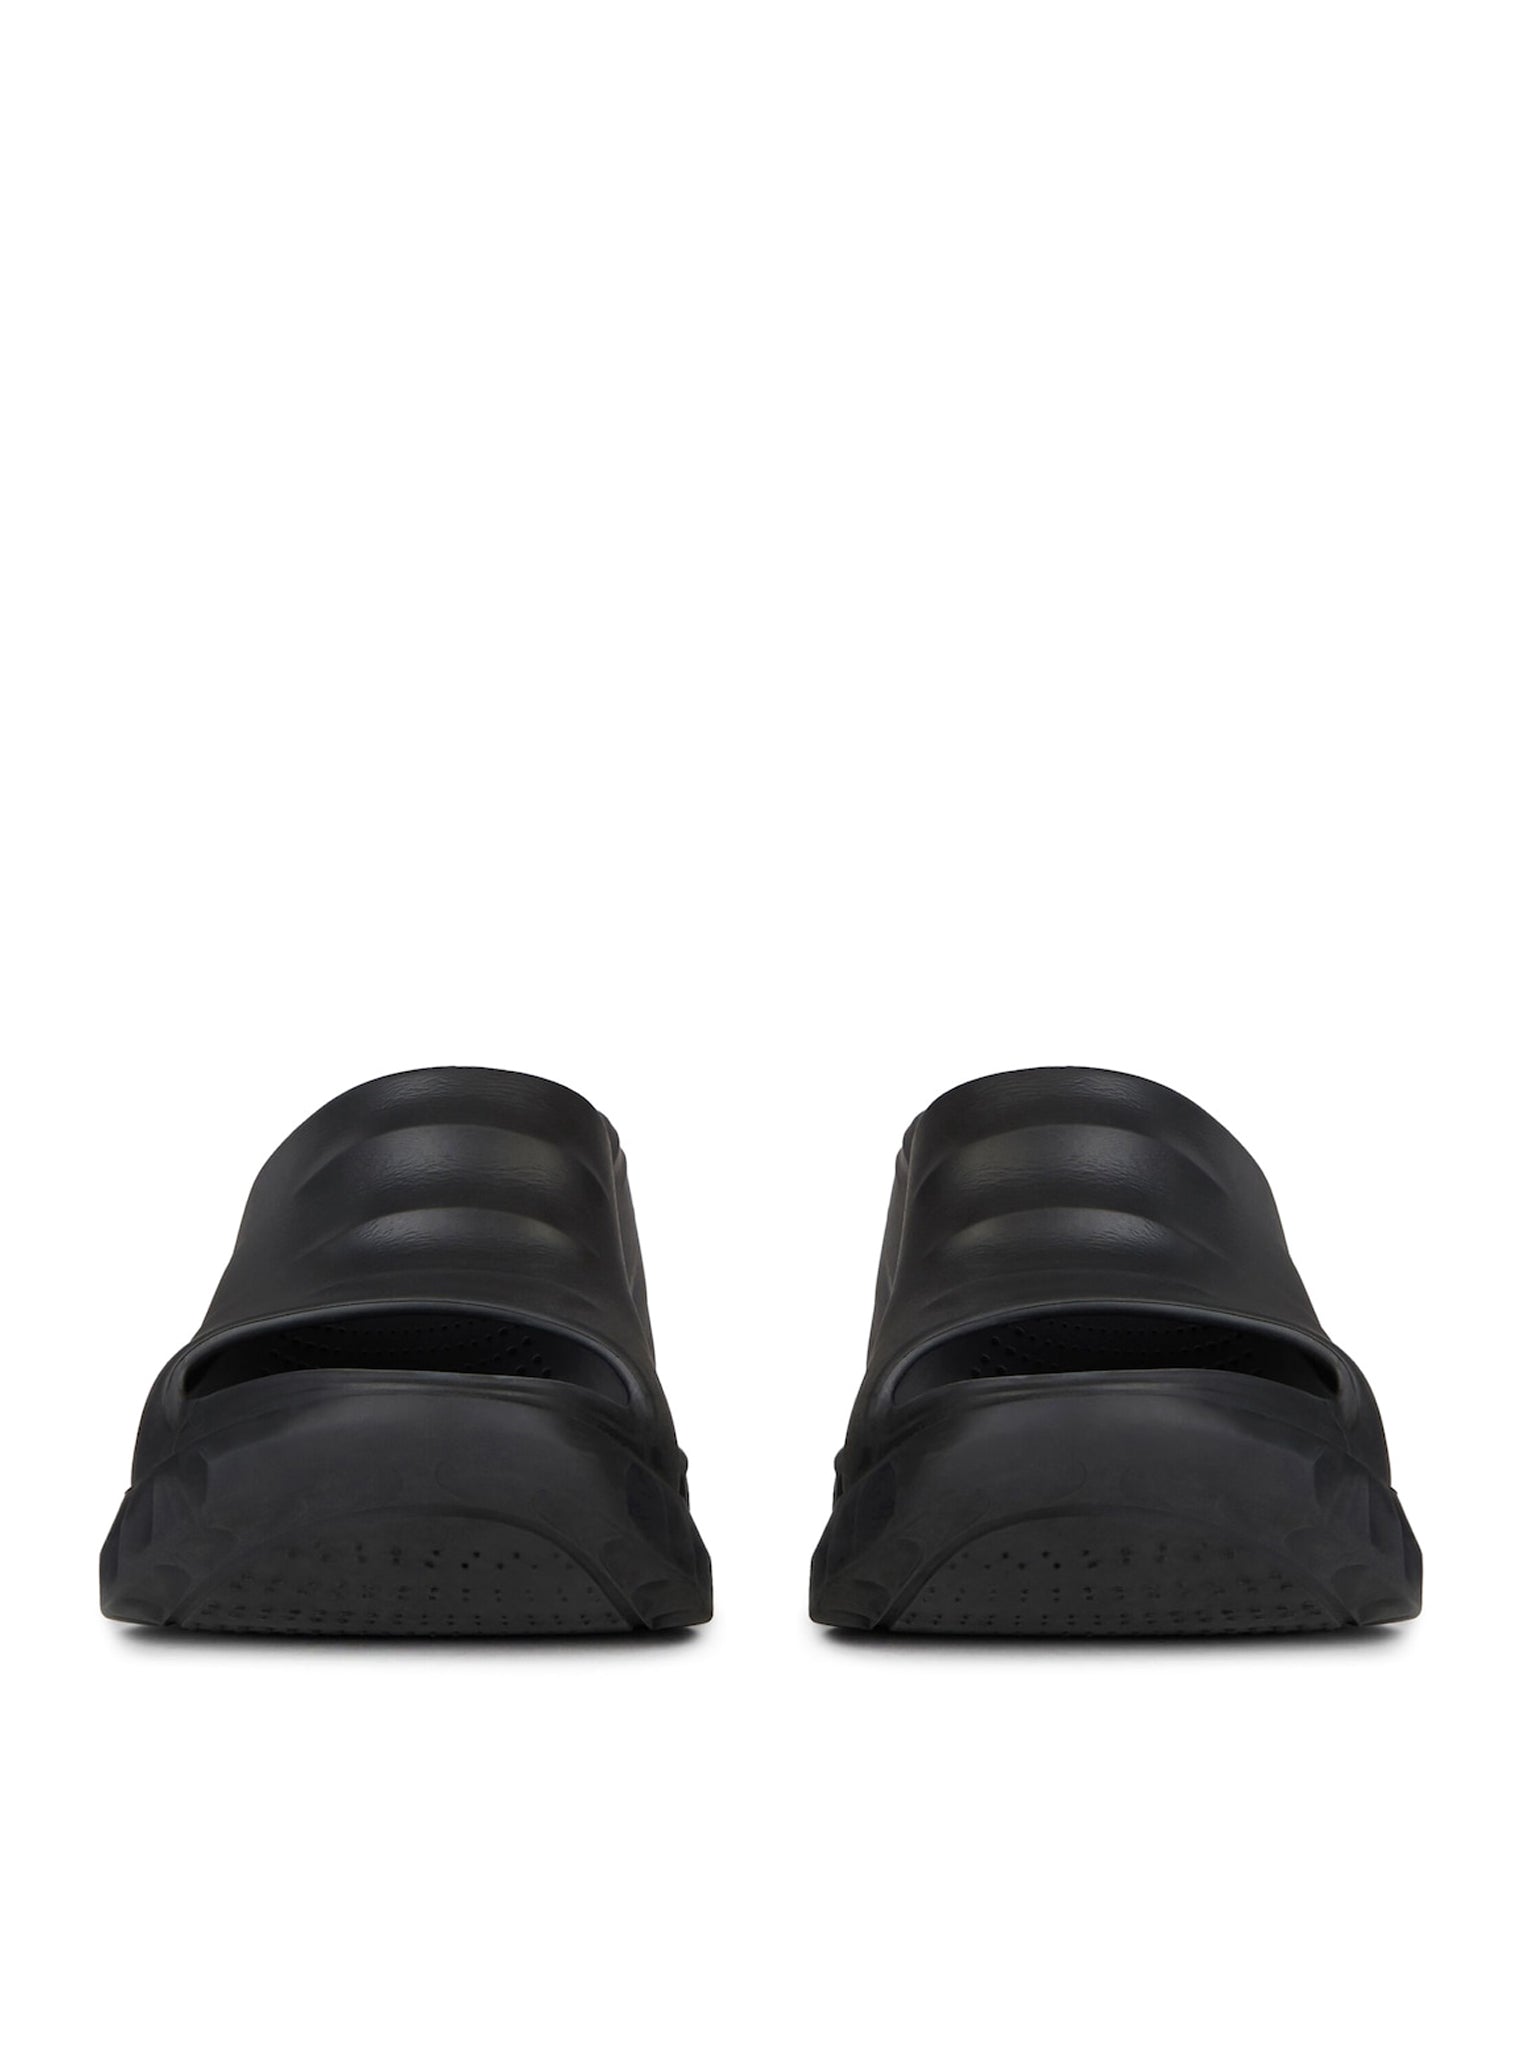 MARSHMALLOW RUBBER WEDGE SANDALS